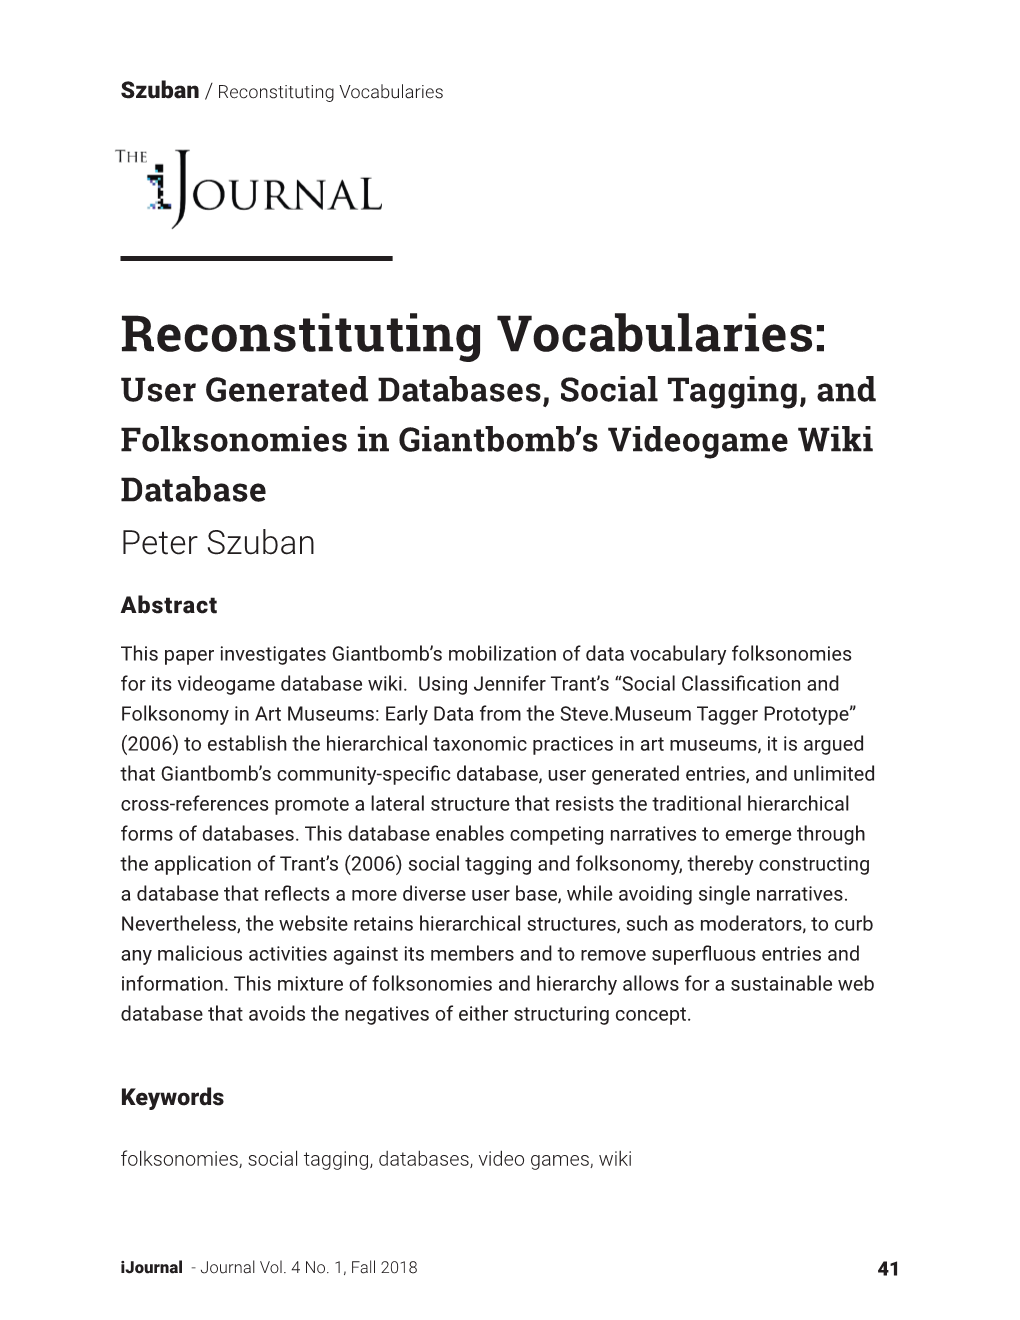 Reconstituting Vocabularies: User Generated Databases, Social Tagging, and Folksonomies in Giantbomb’S Videogame Wiki Database Peter Szuban